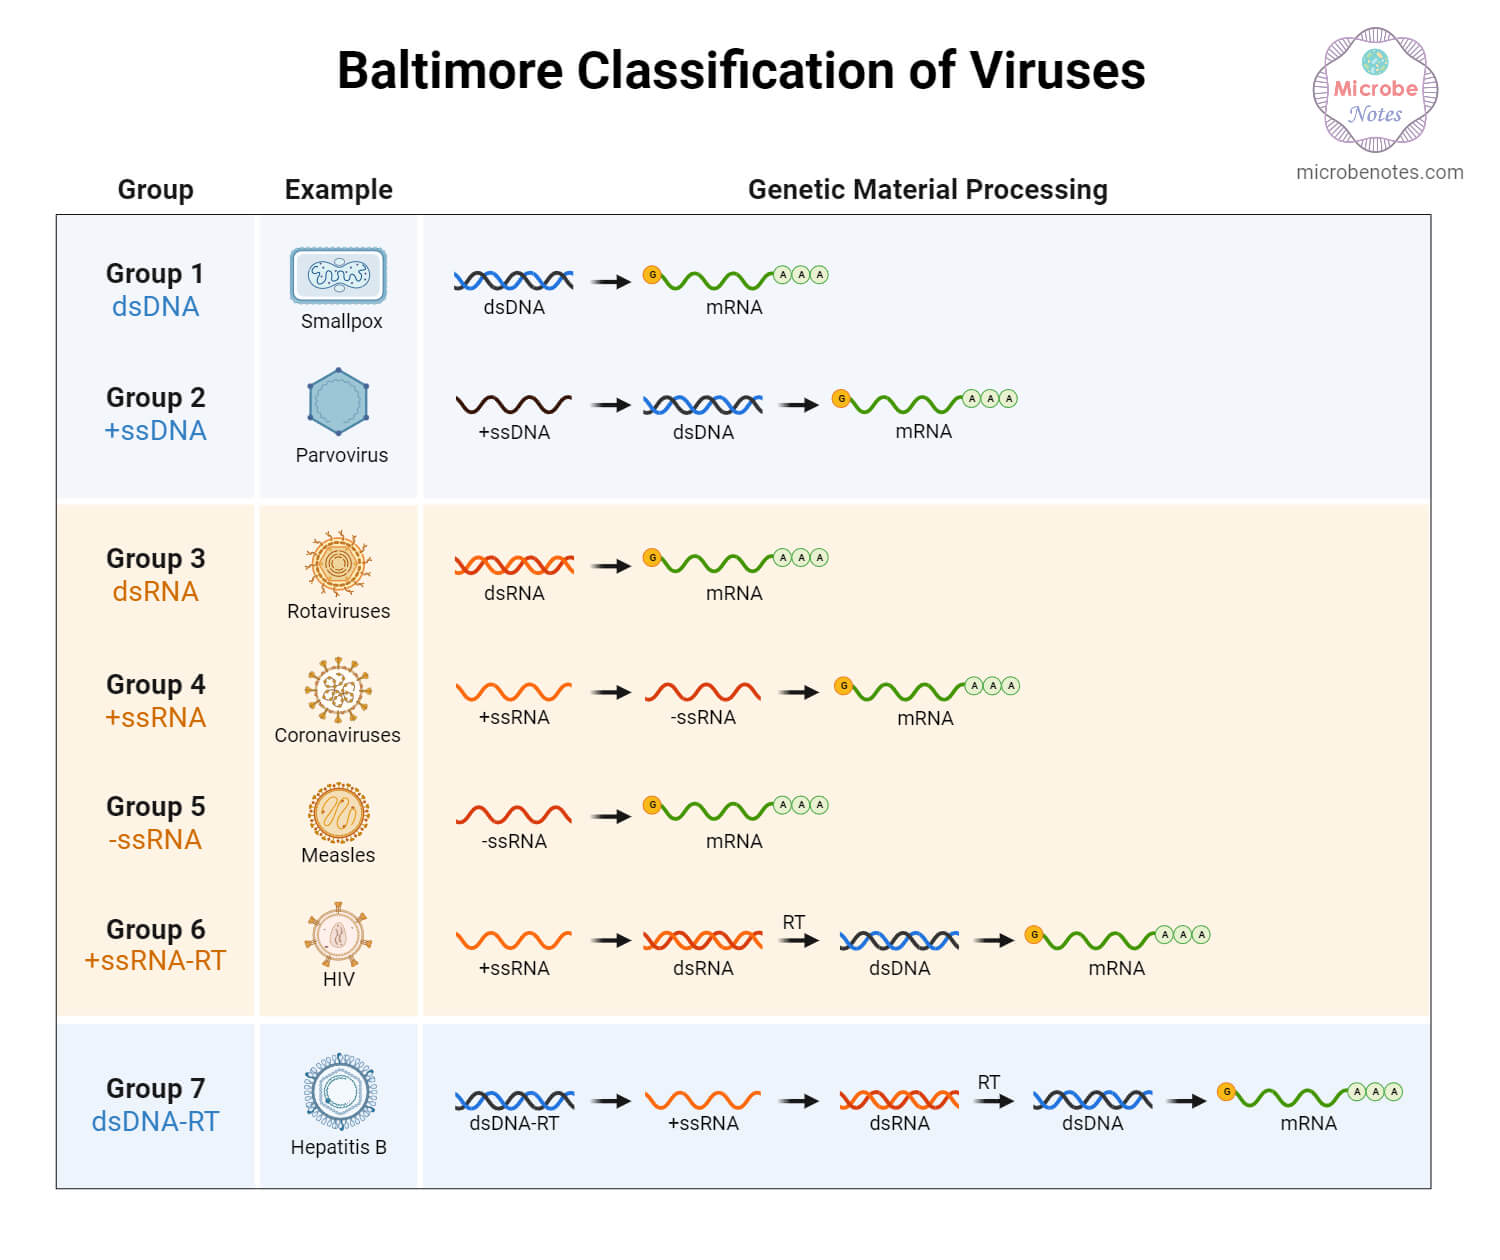 The Baltimore Classification of Viruses